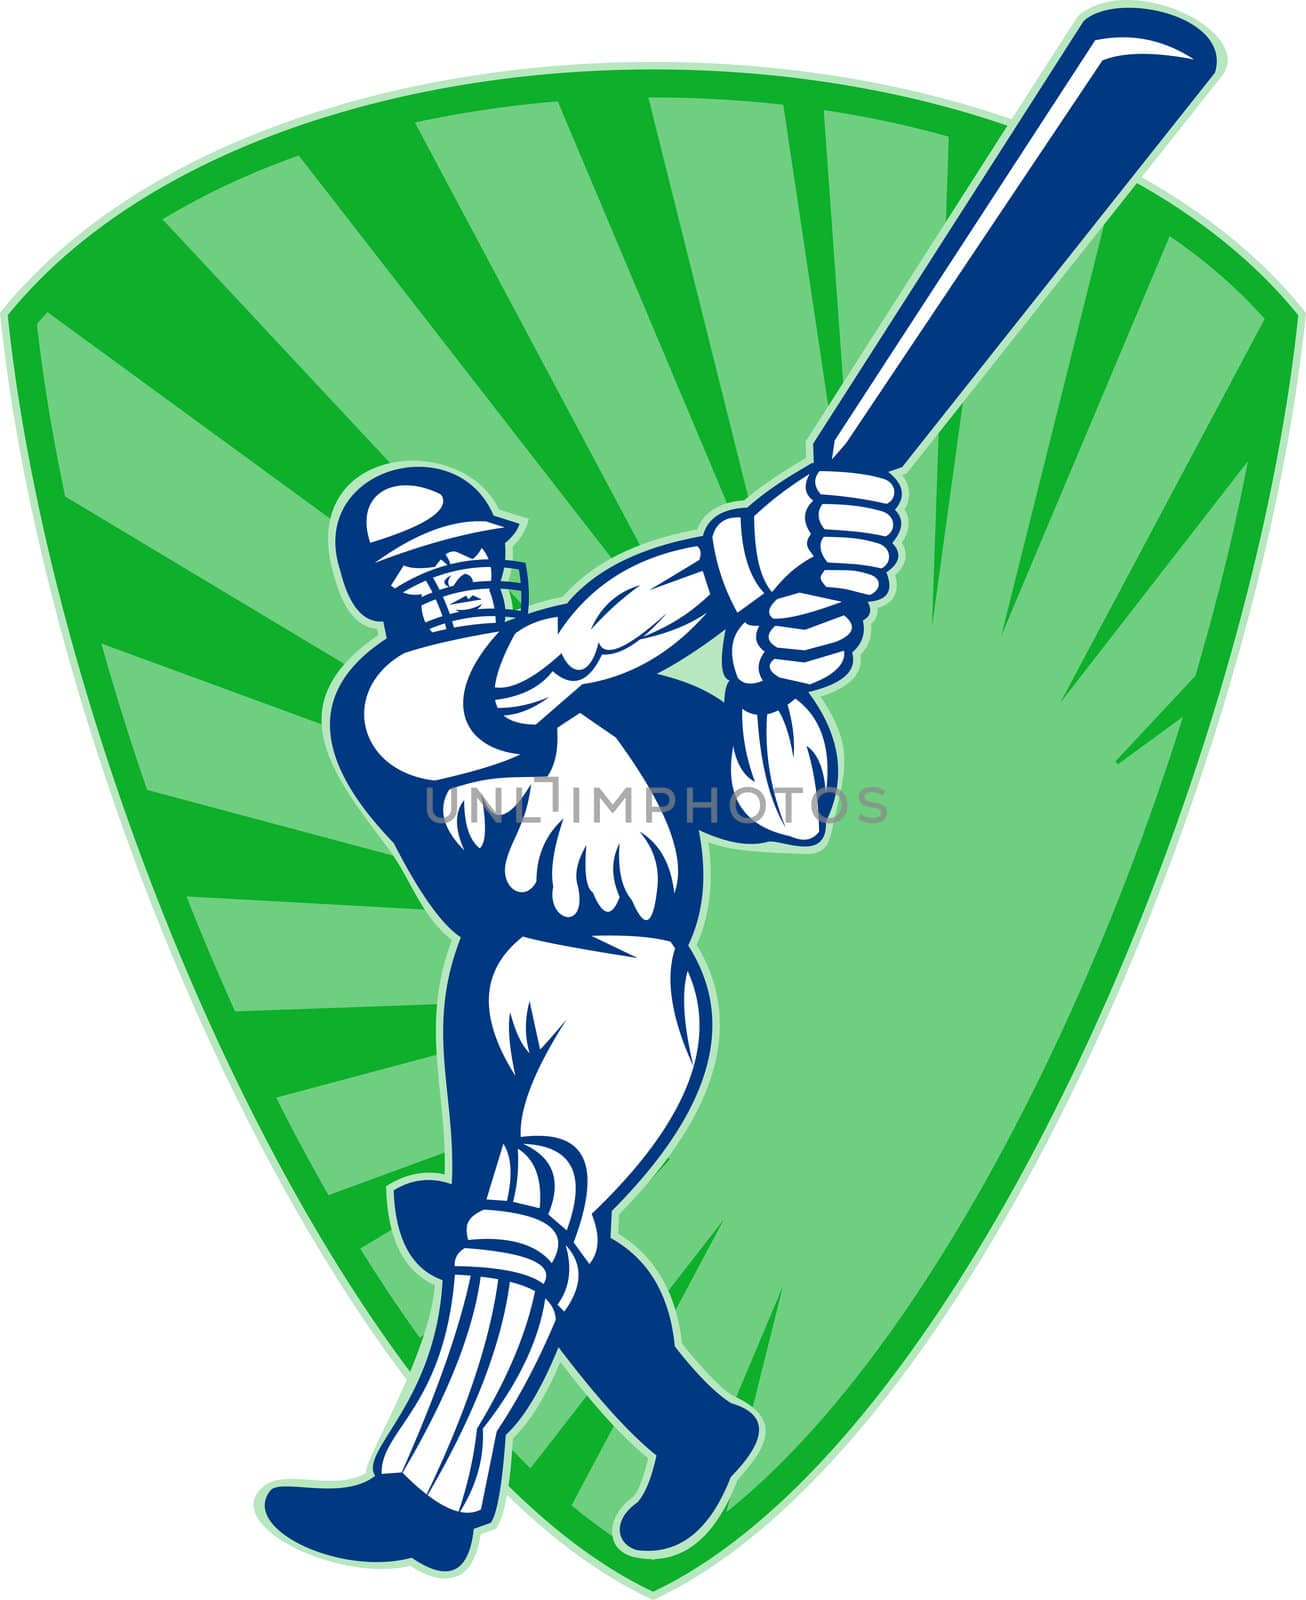 illustration of a cricket batsman silhouette batting front view  with shield in background